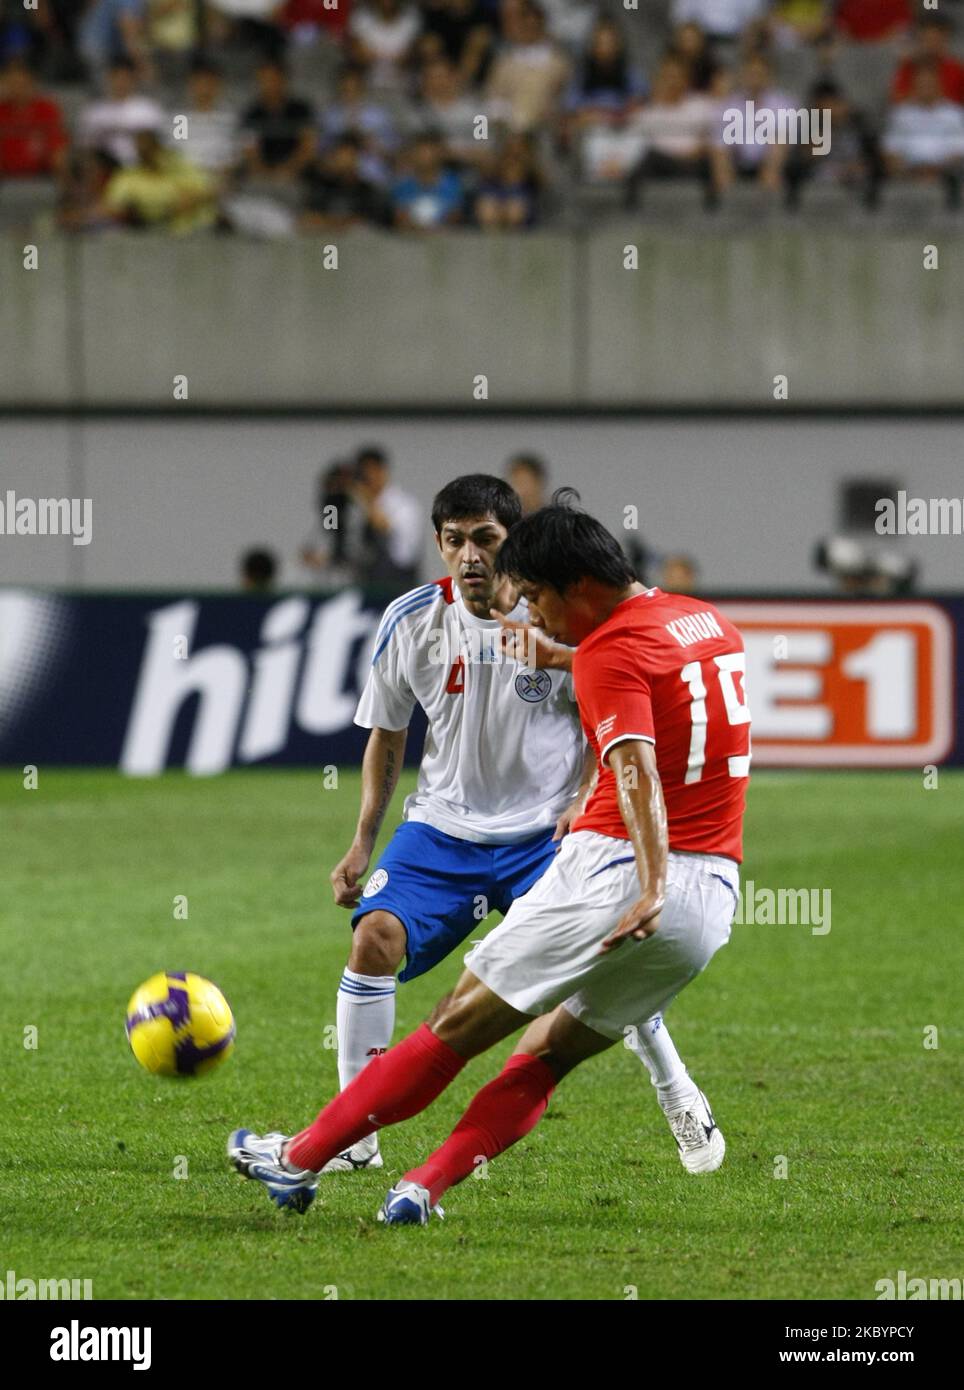 Yeom Ki-Hun(ftont), South Korea, and Denis Caniza, Paraguay, compete for the ball during the international friendly match between South Korea and Paraguay at Seoul Worldcup stadium on August 12, 2009 in Seoul, South Korea. (Photo by Seung-il Ryu/NurPhoto) Stock Photo